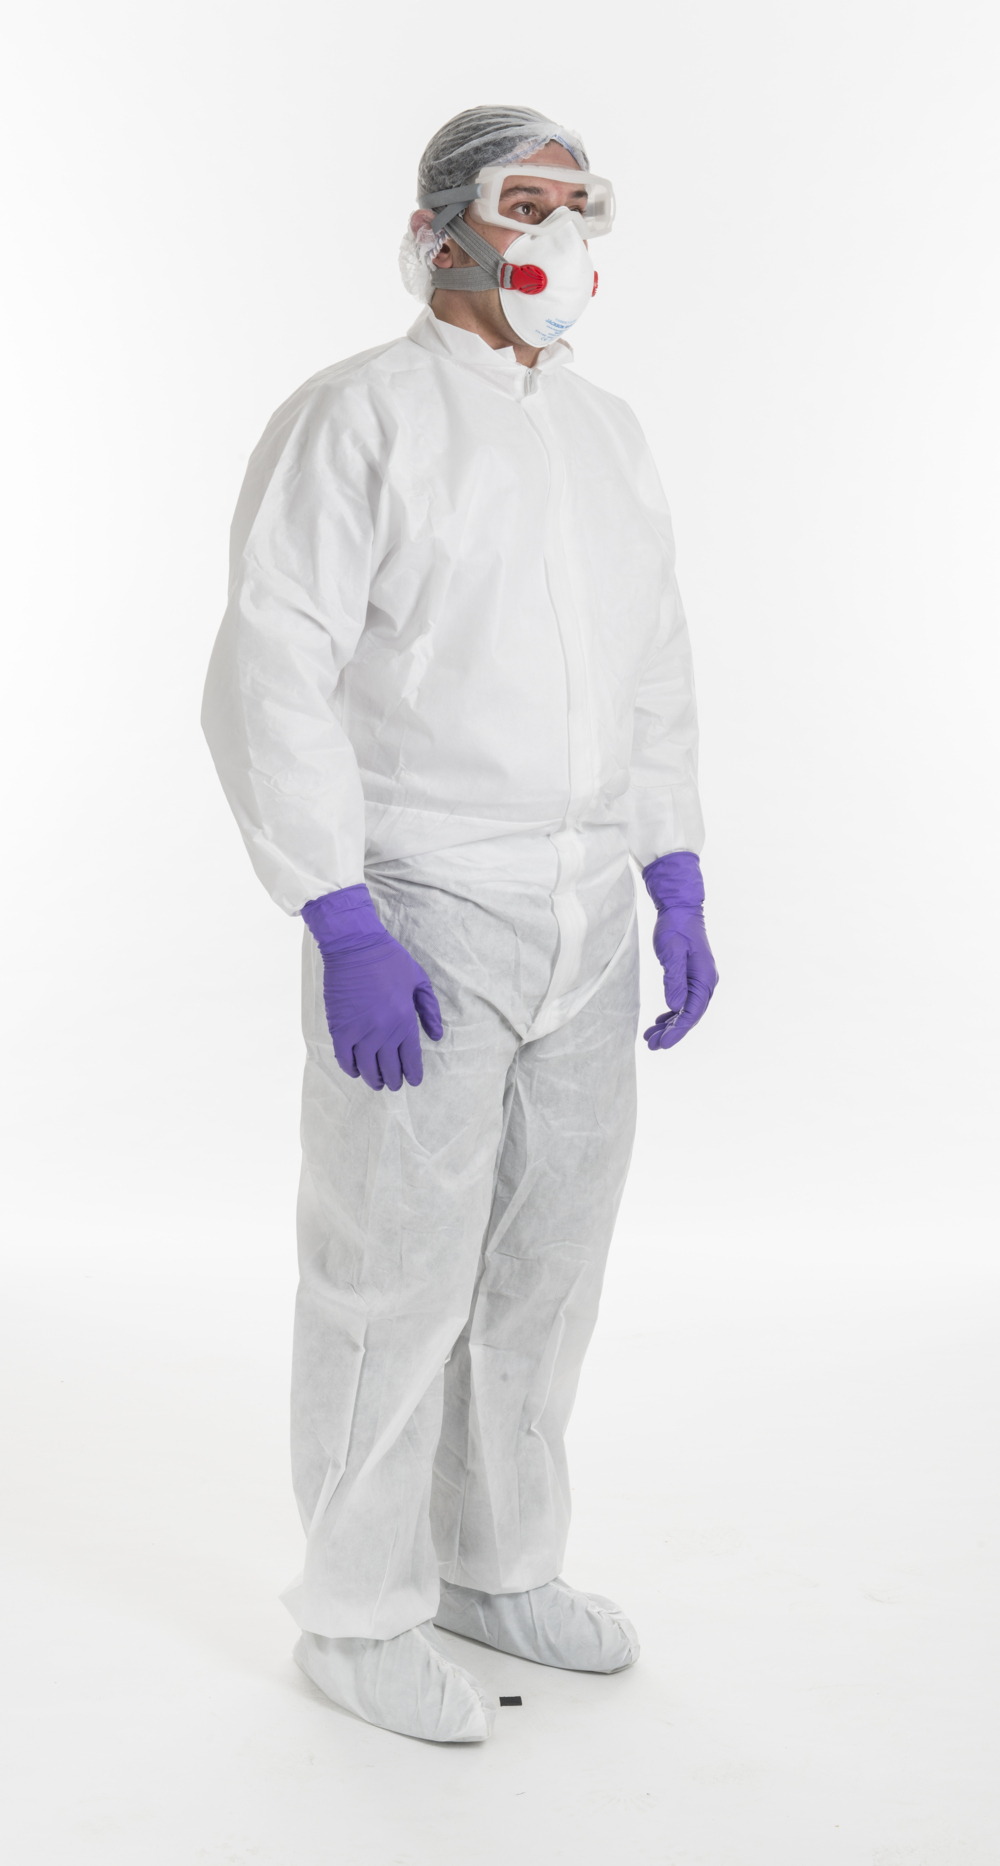 Kimtech™ A8 Coverall 47691 - White, S, 1x25 (25 total) - 47691